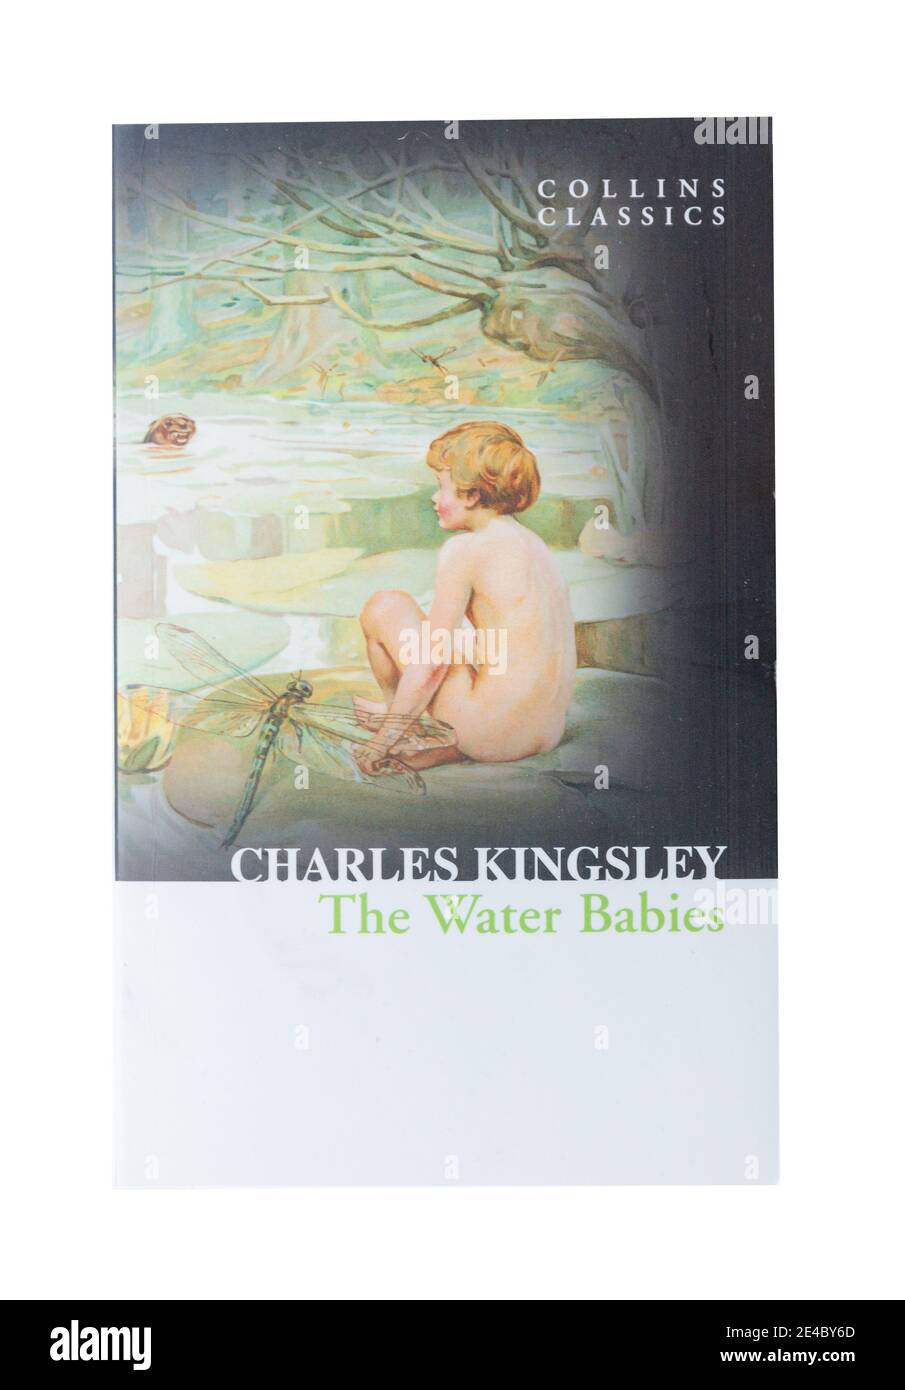 The Water Babies book by Charles Kingsley, Greater London, England, United Kingdom Stock Photo